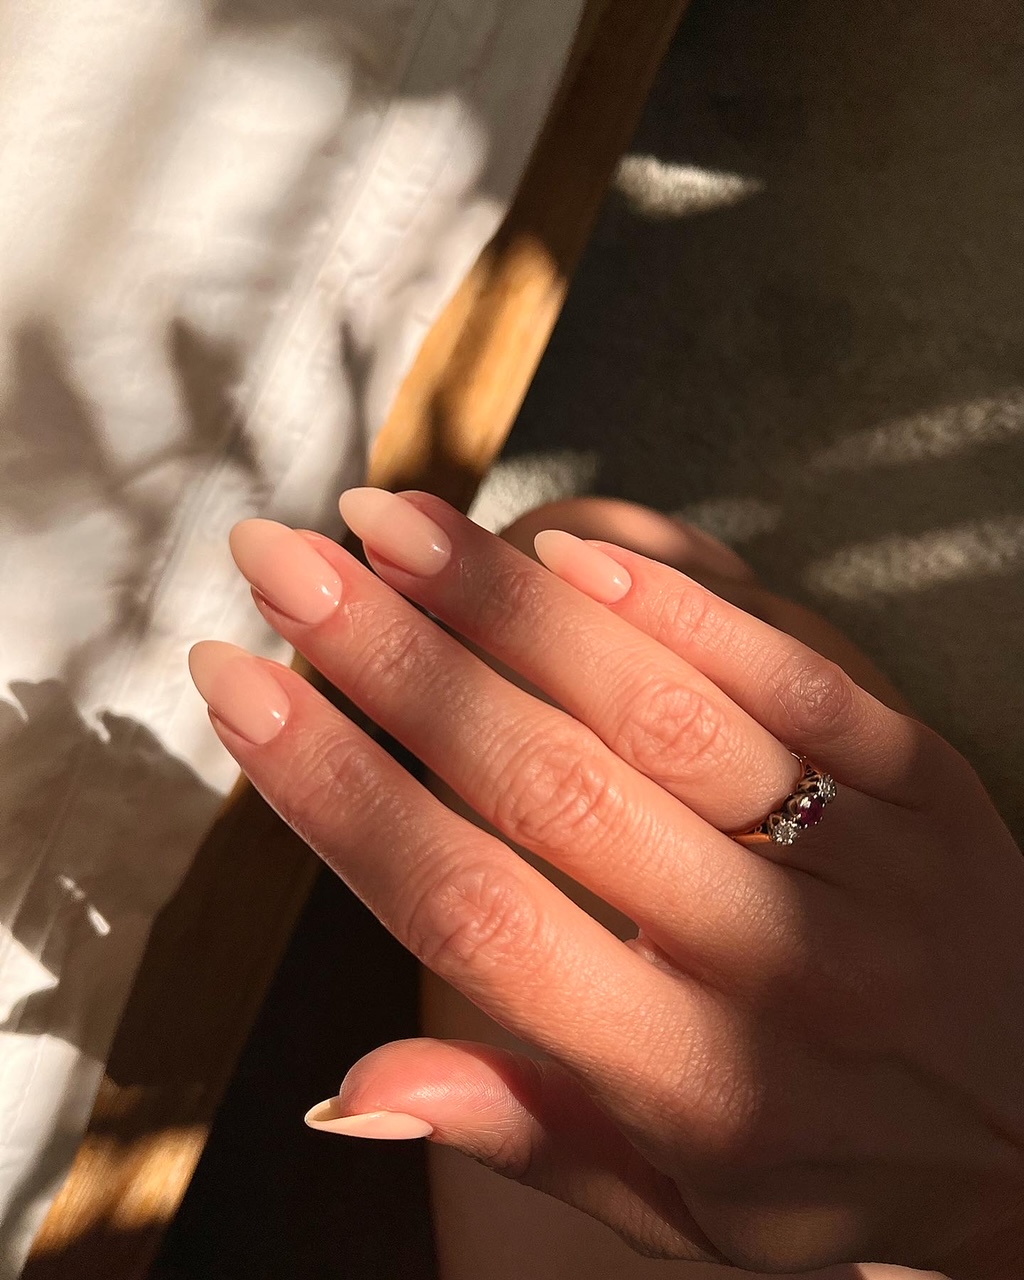 Sheer nude nails in an almond shape